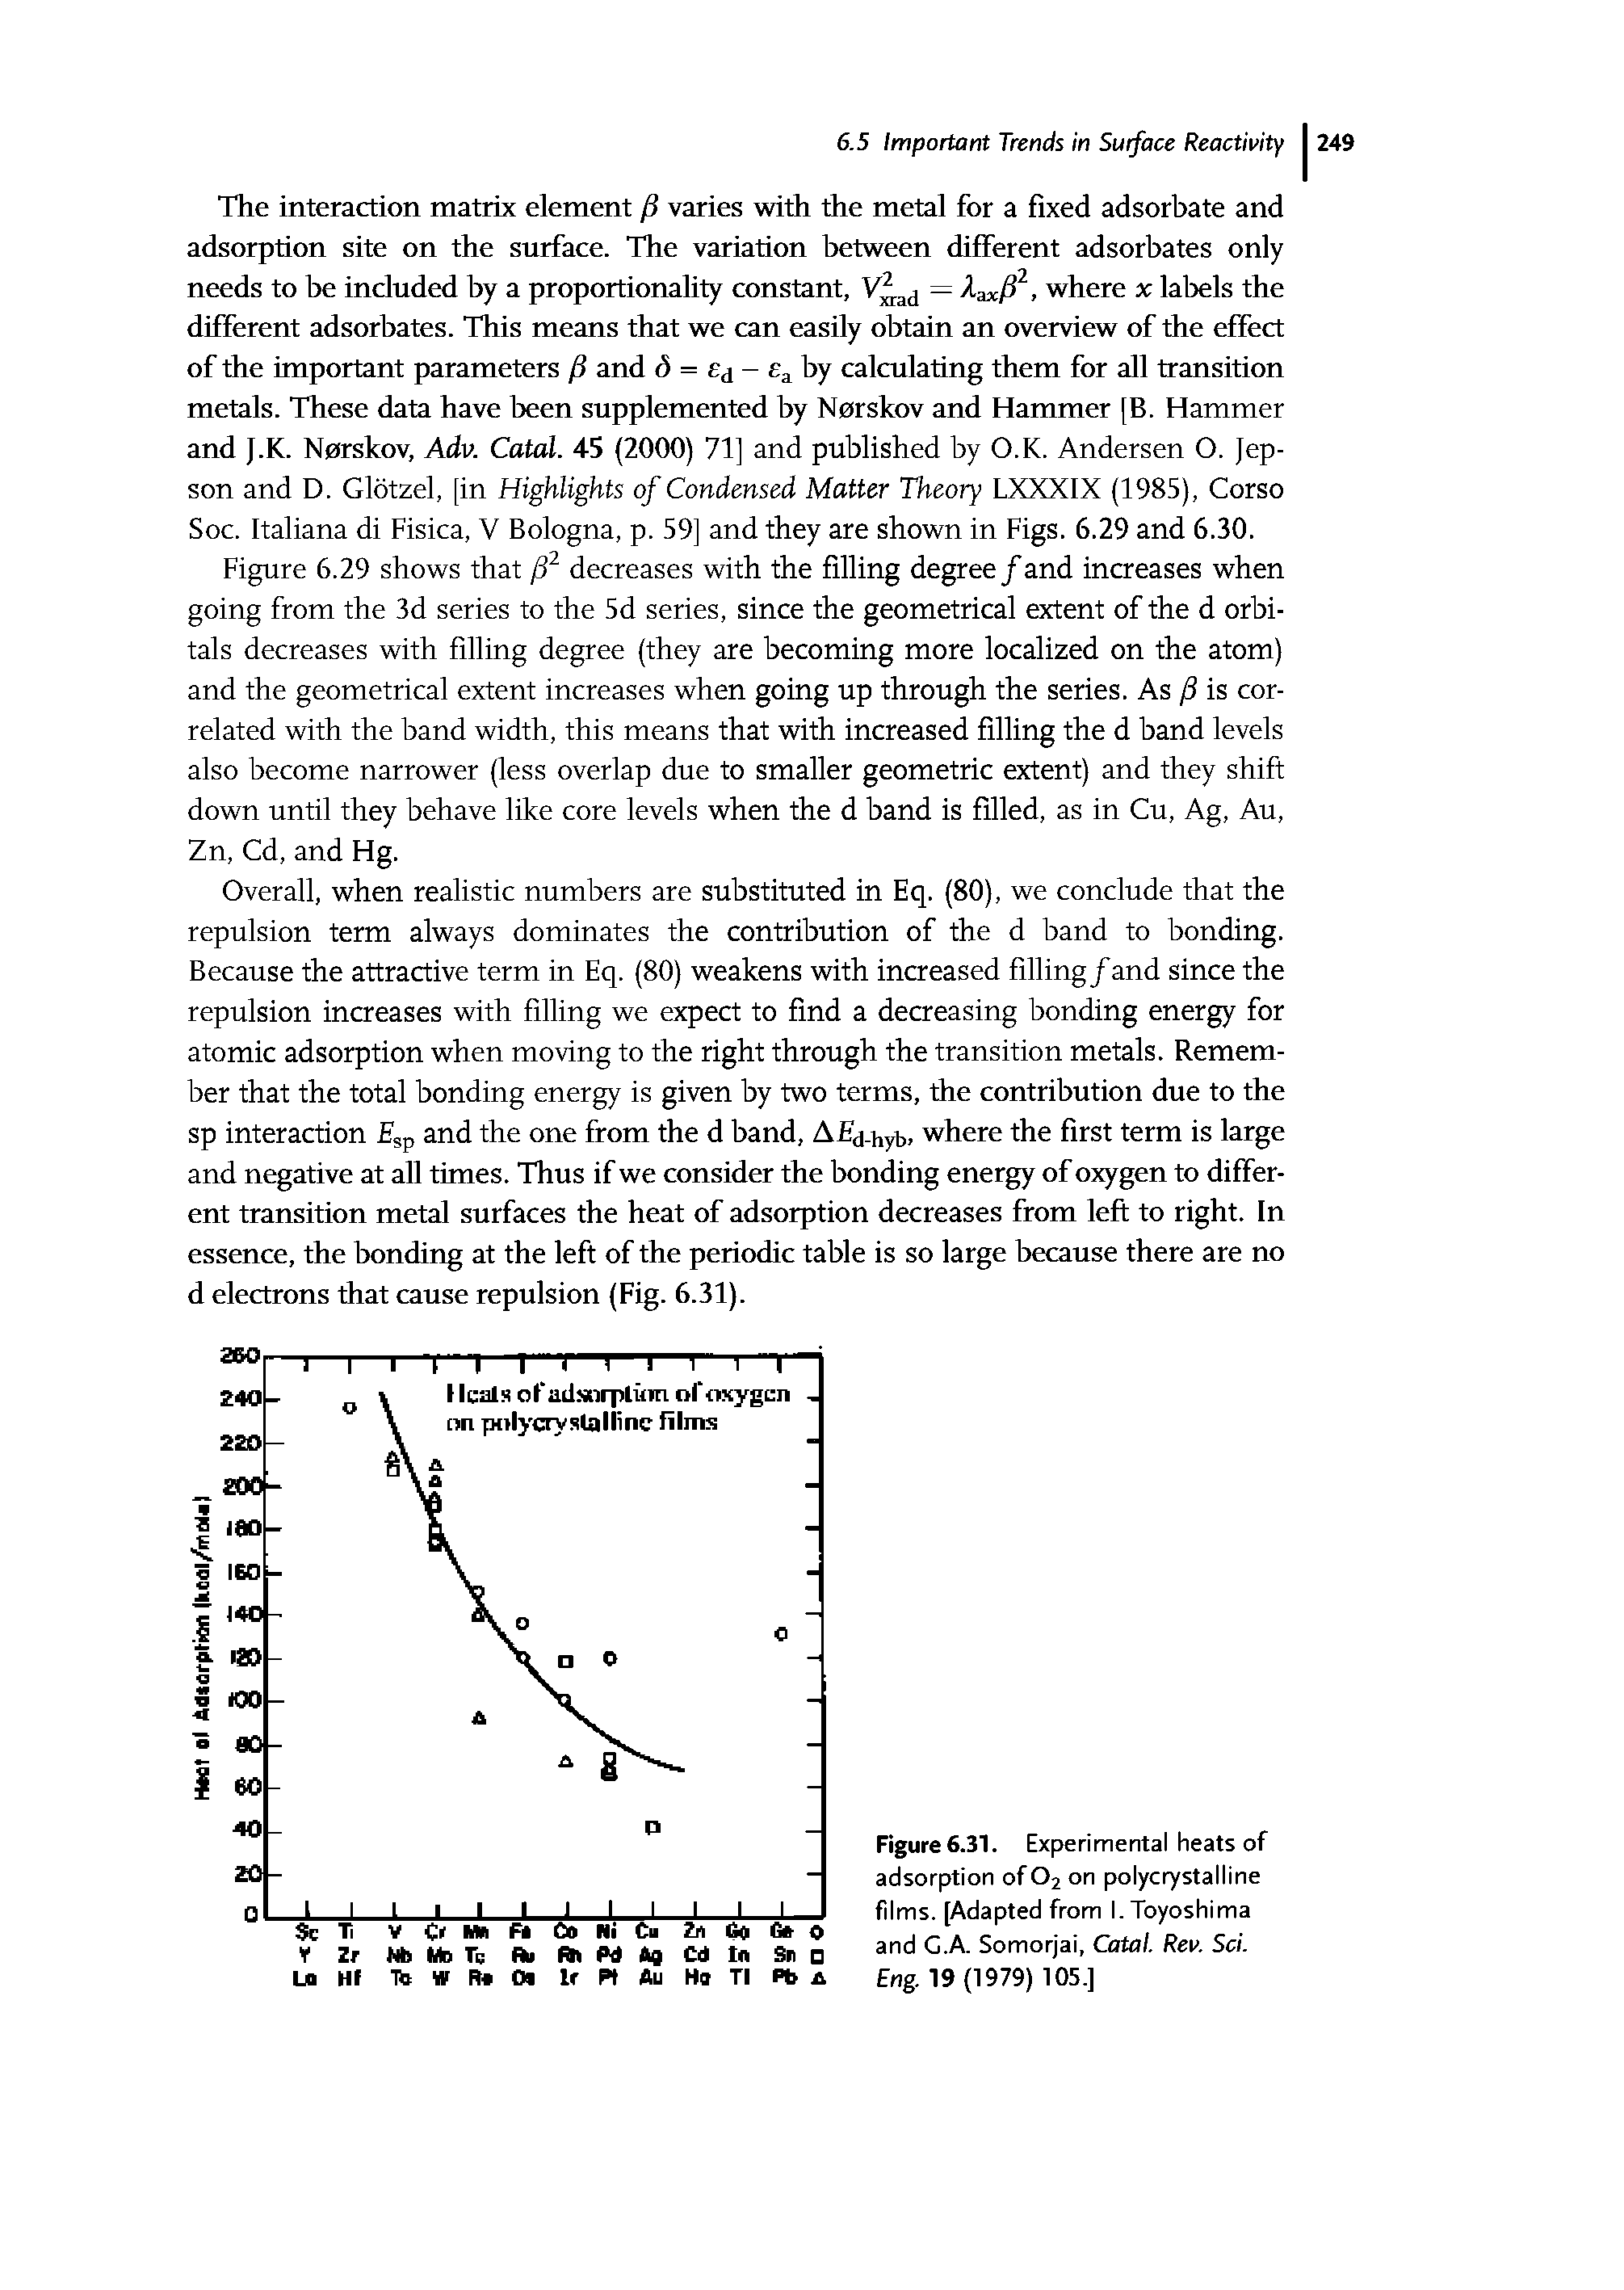 Figure6.3i. Experimental heats of adsorption of O2 on polycrystalline films. [Adapted from I.Toyoshima and G.A. Somorjai, Catal. Rev. Sci. Eng. 19 (1979) 105.]...